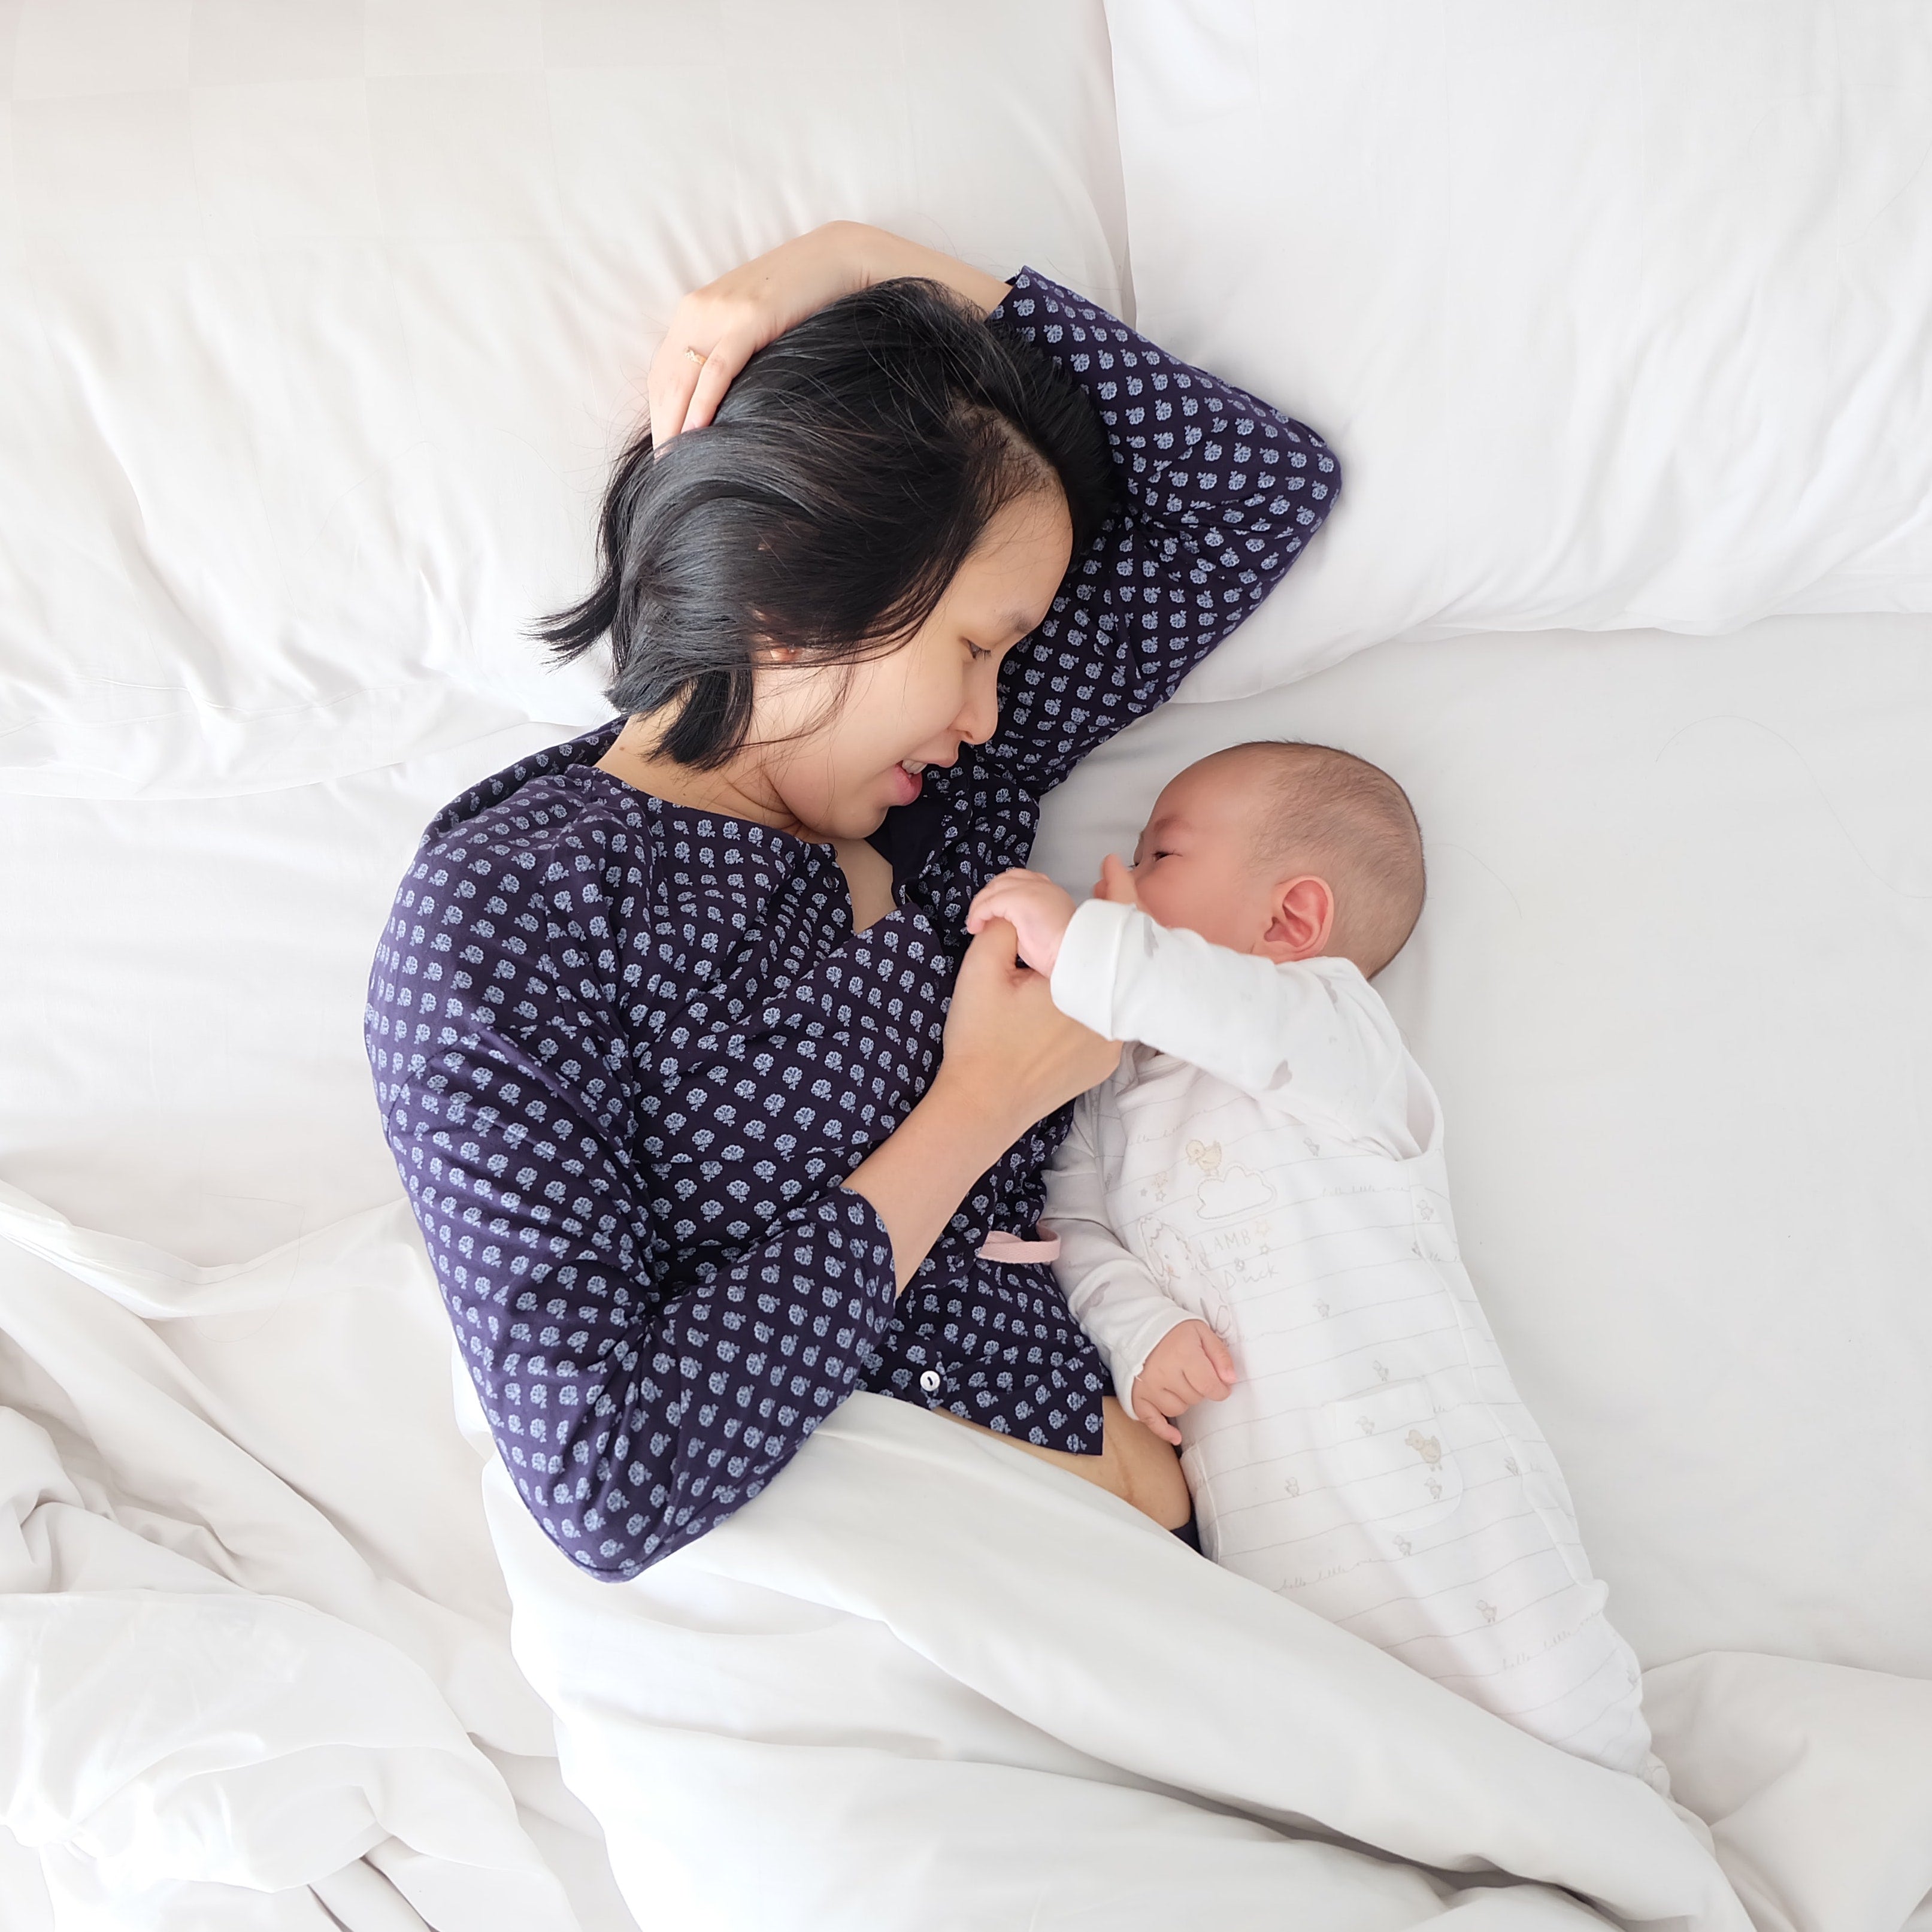 Breastfeeding Habits from 8 Countries Around the World